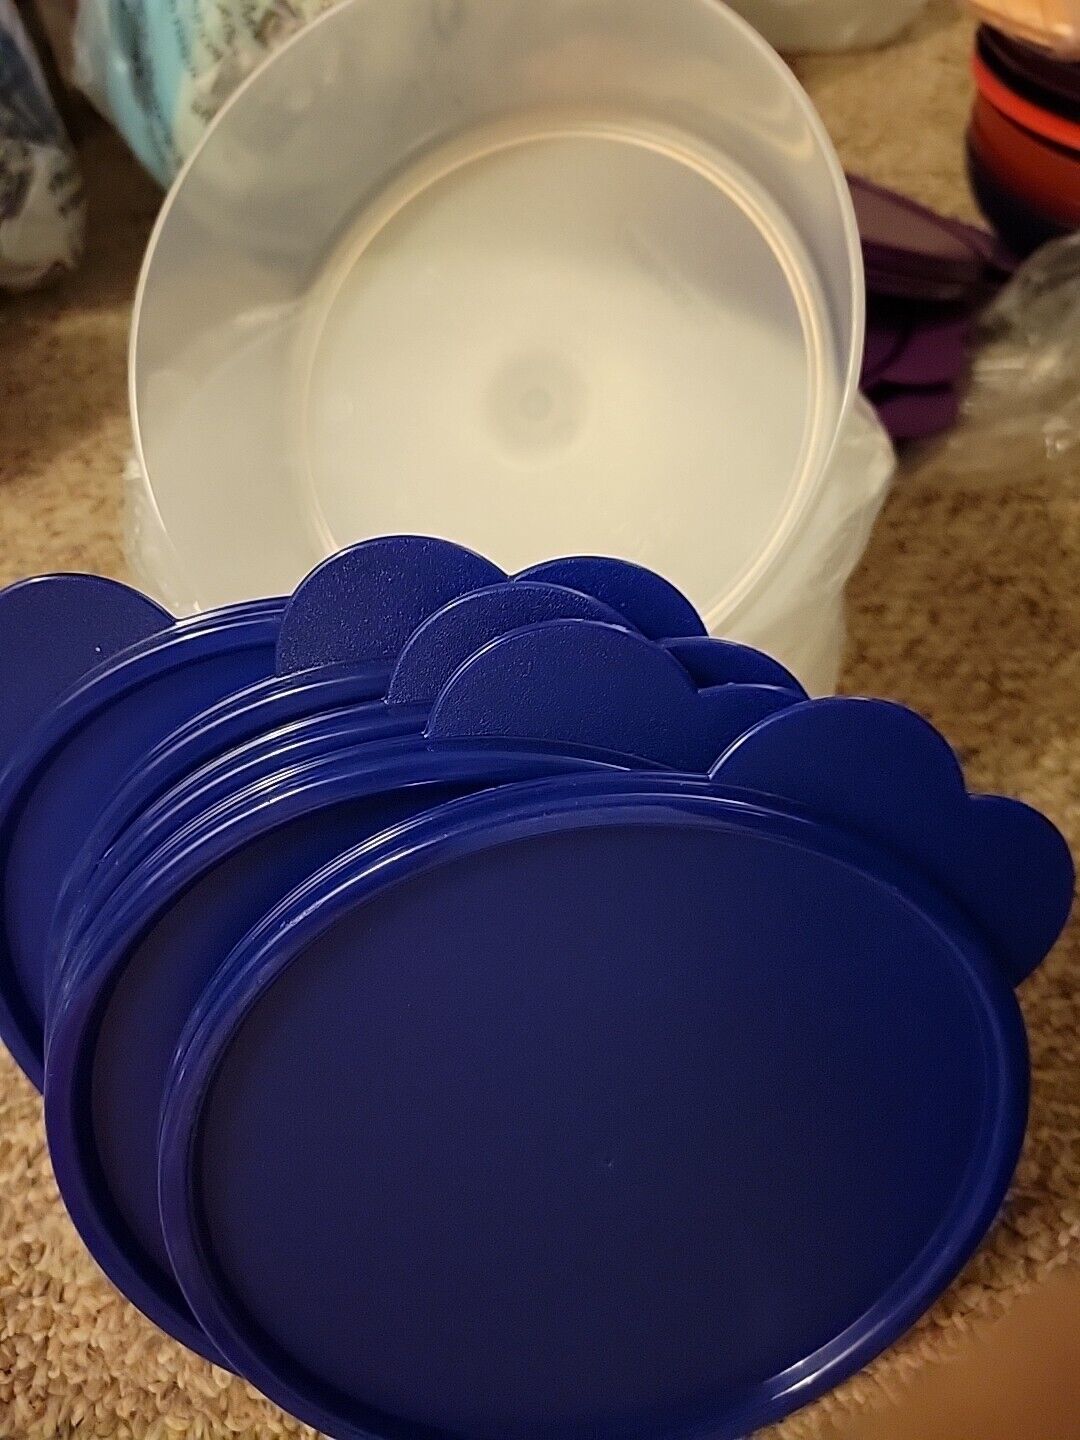 TUPPERWARE 3c.CEREAL/CLEAR Base STORAGE BOWLS - Set Of 5-w 5 Butterfly Lids 